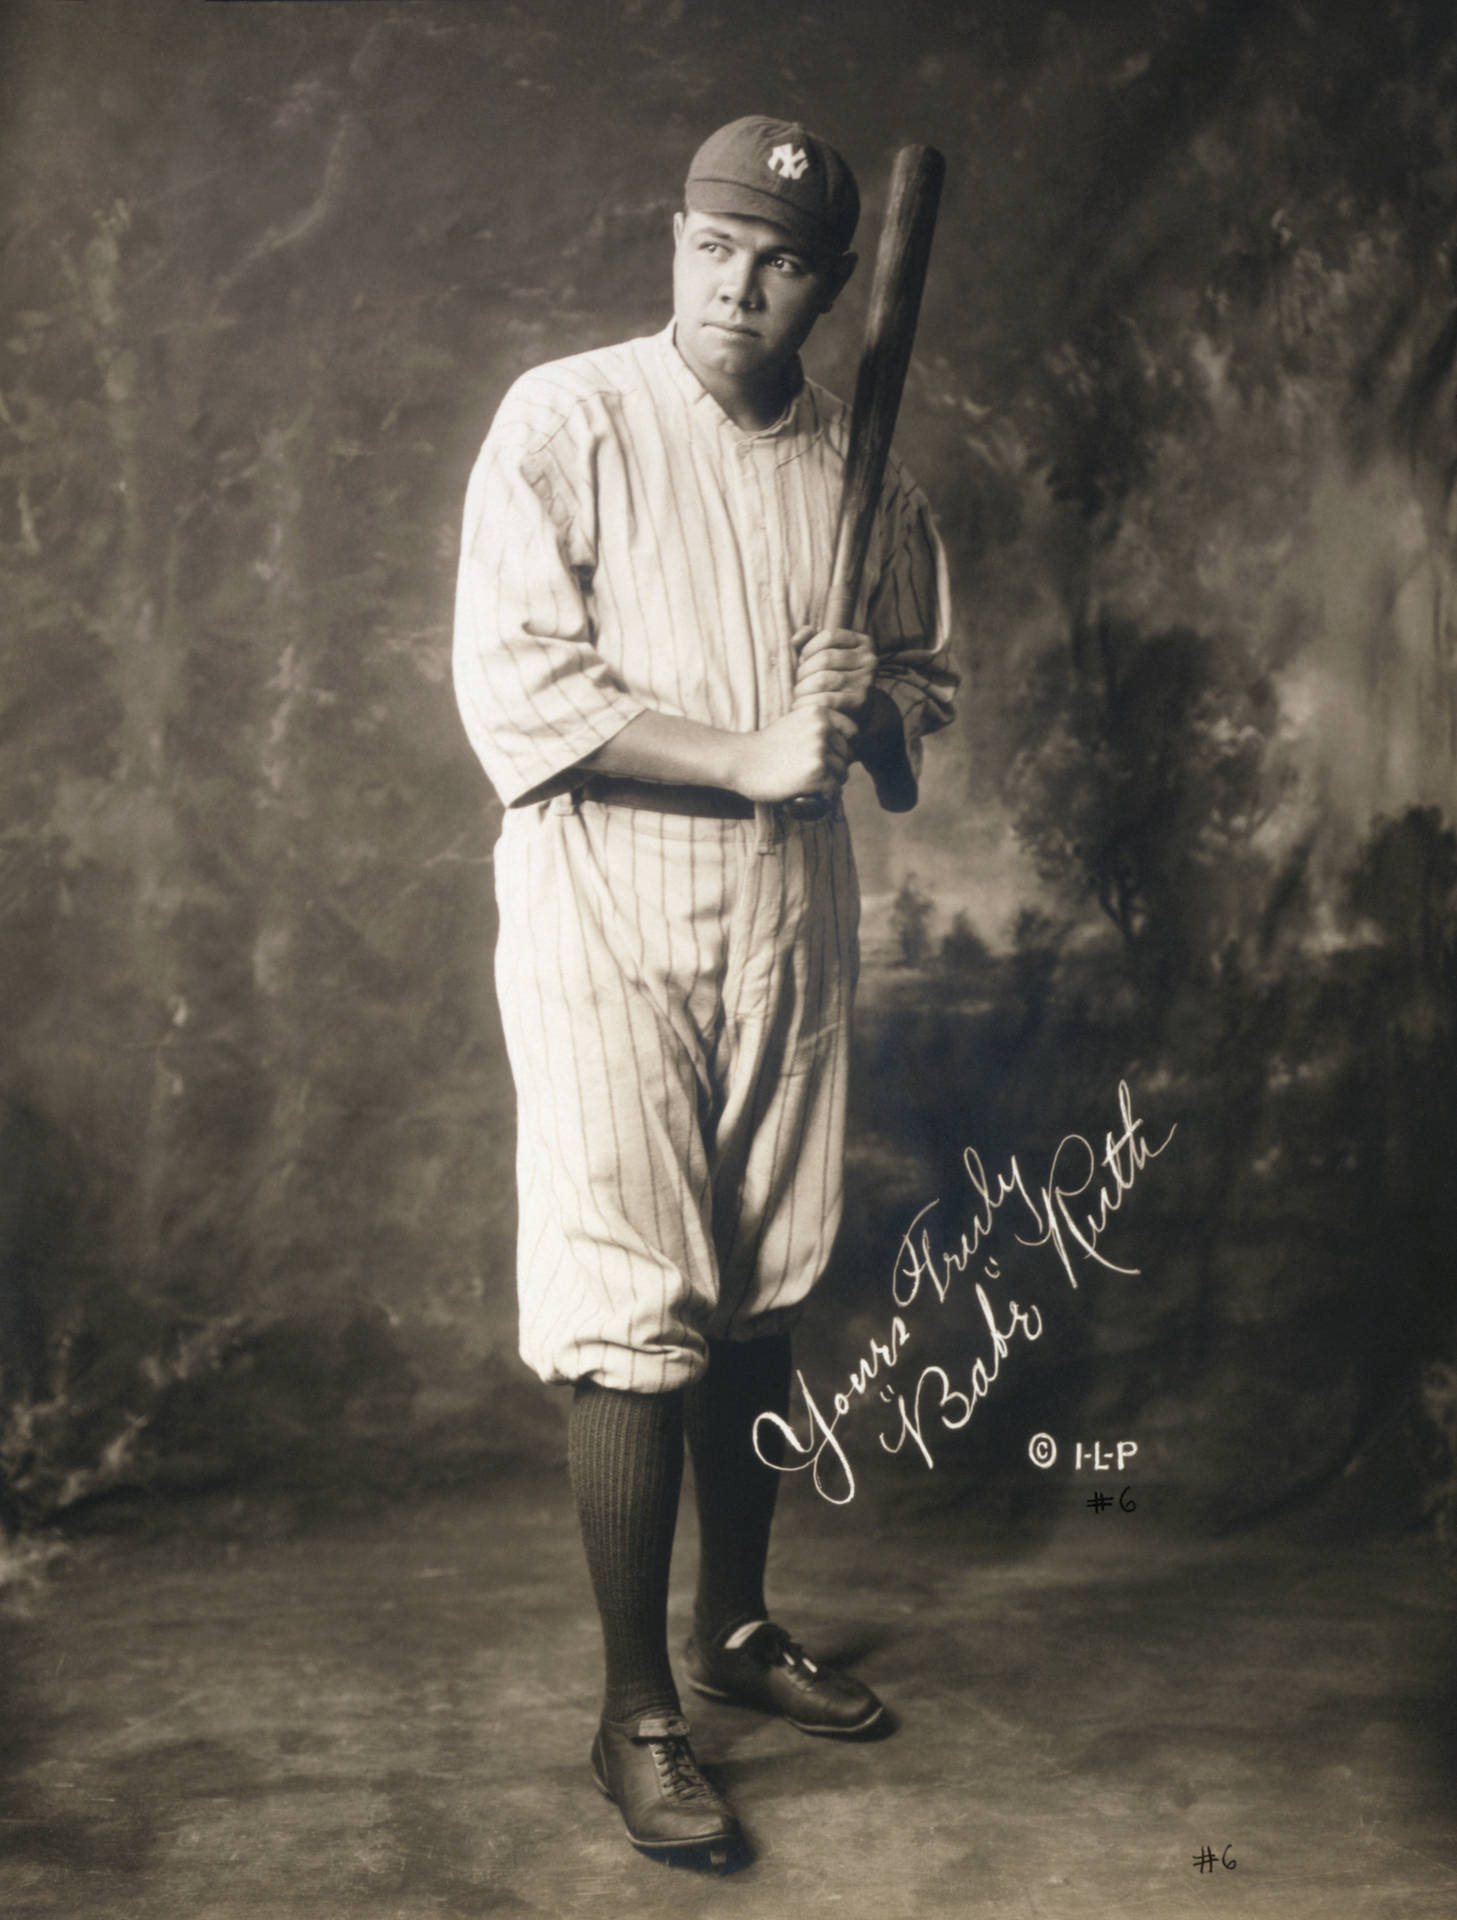 Babe Ruth Poster With Signature Wallpaper